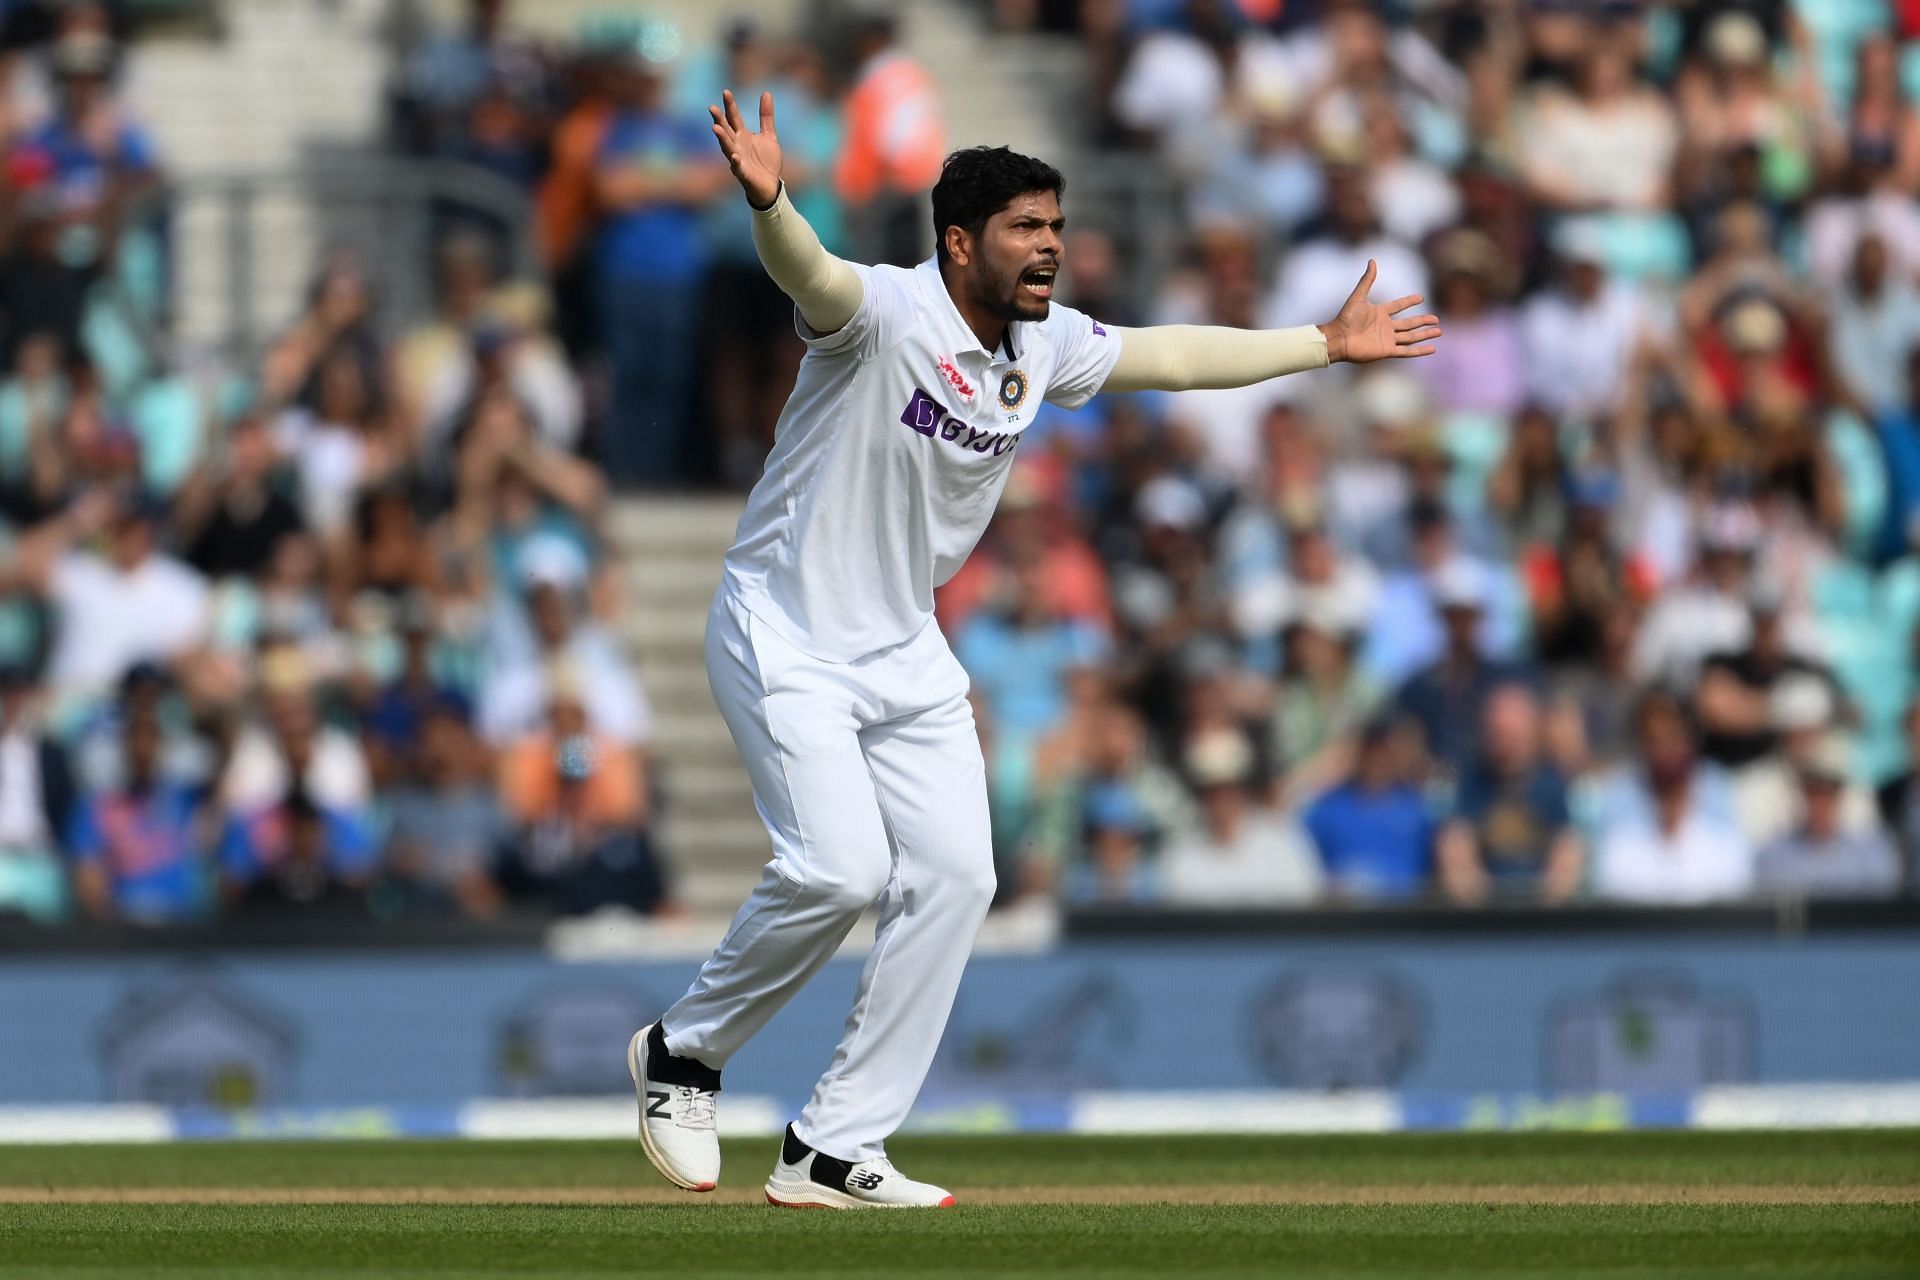 England v India - Fourth LV= Insurance Test: Day Five